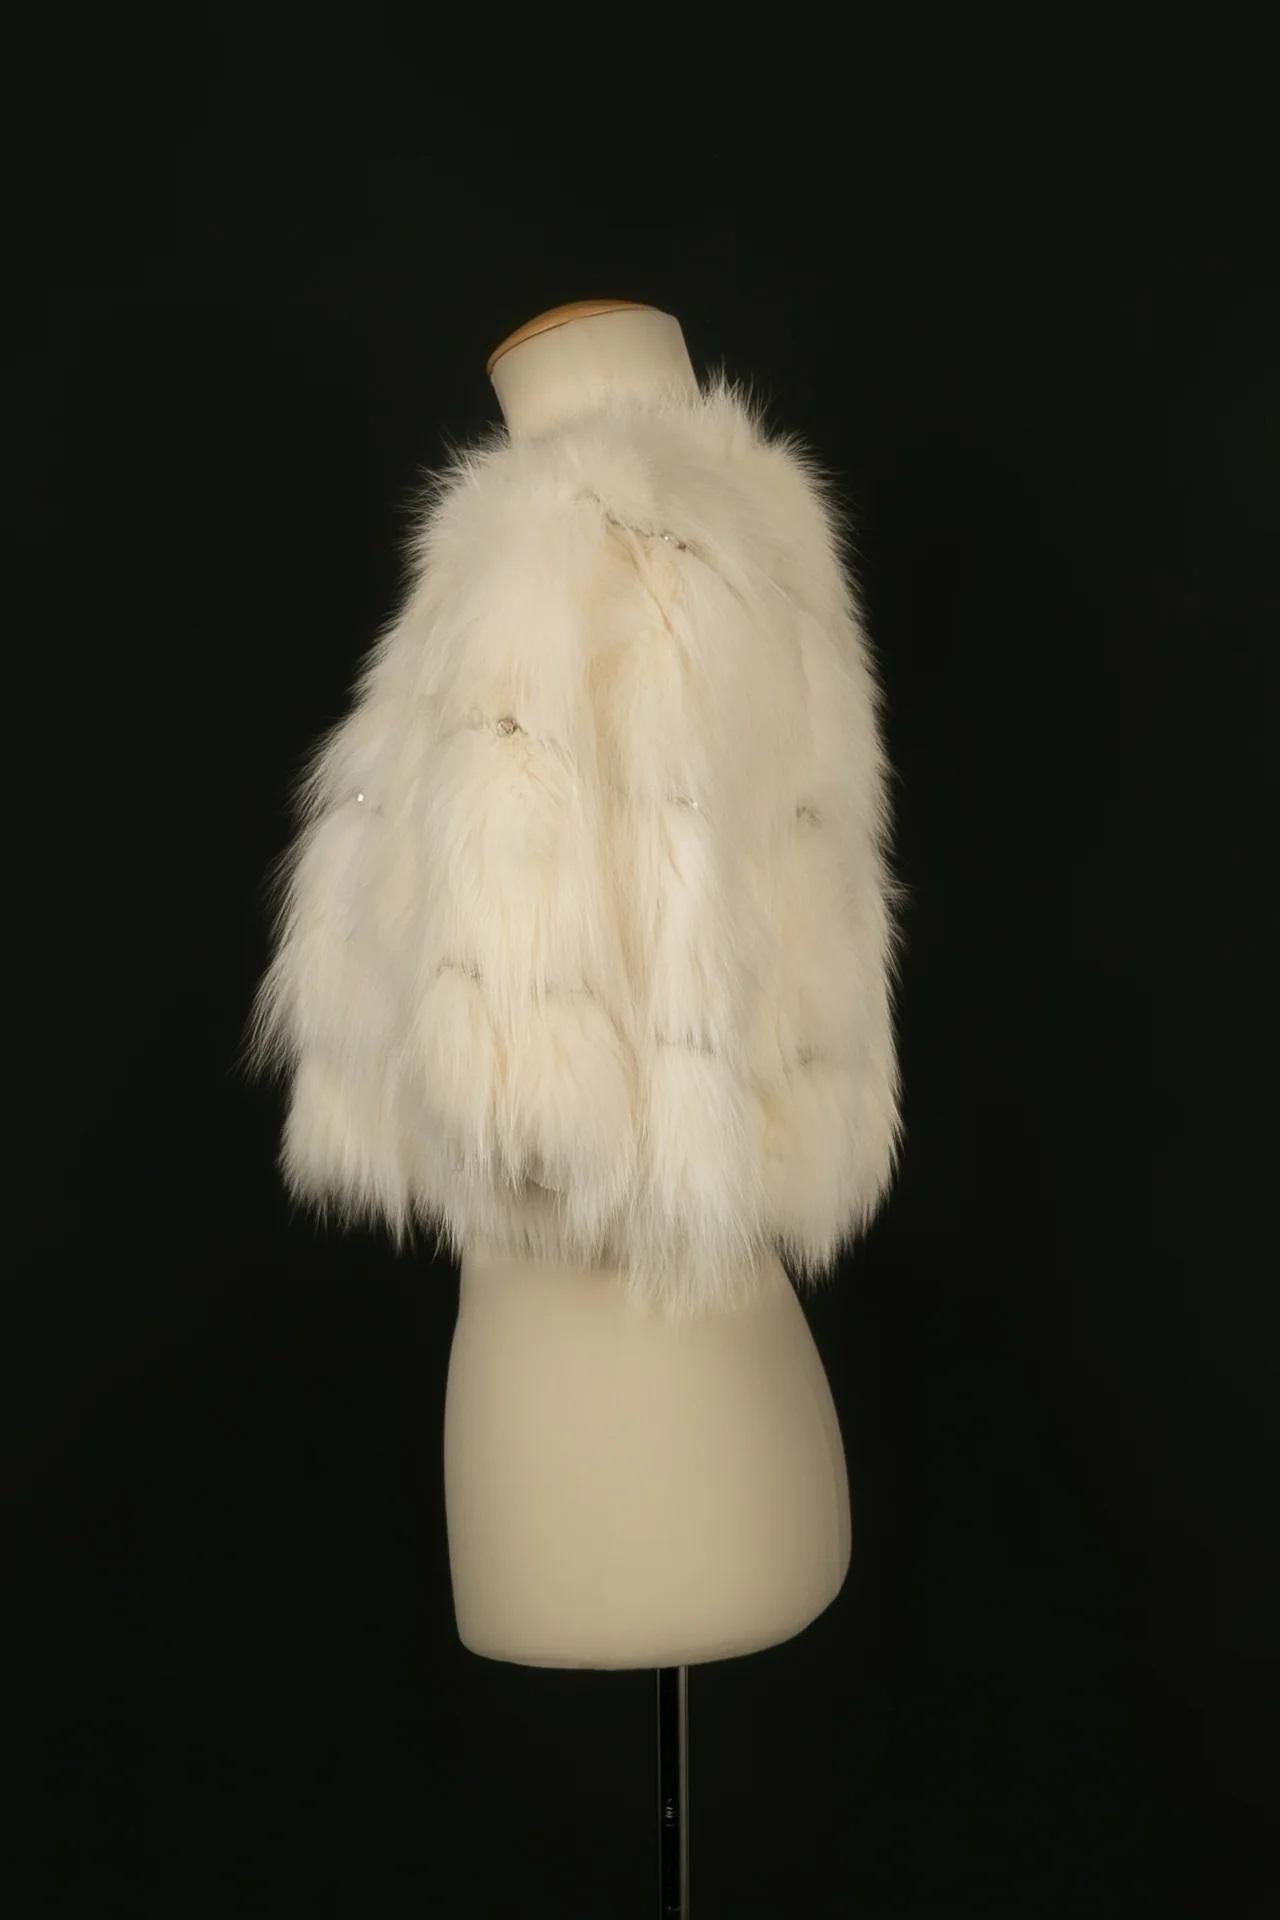 Roberto Cavalli - (Made in Italy) Bolero in white fox and muslin enlivened with rhinestones lines. Size 38FR.

Additional information:
Dimensions: Shoulder width: 40 cm
Length: 42 cm
Condition: Very good condition
Seller Ref number: FV127